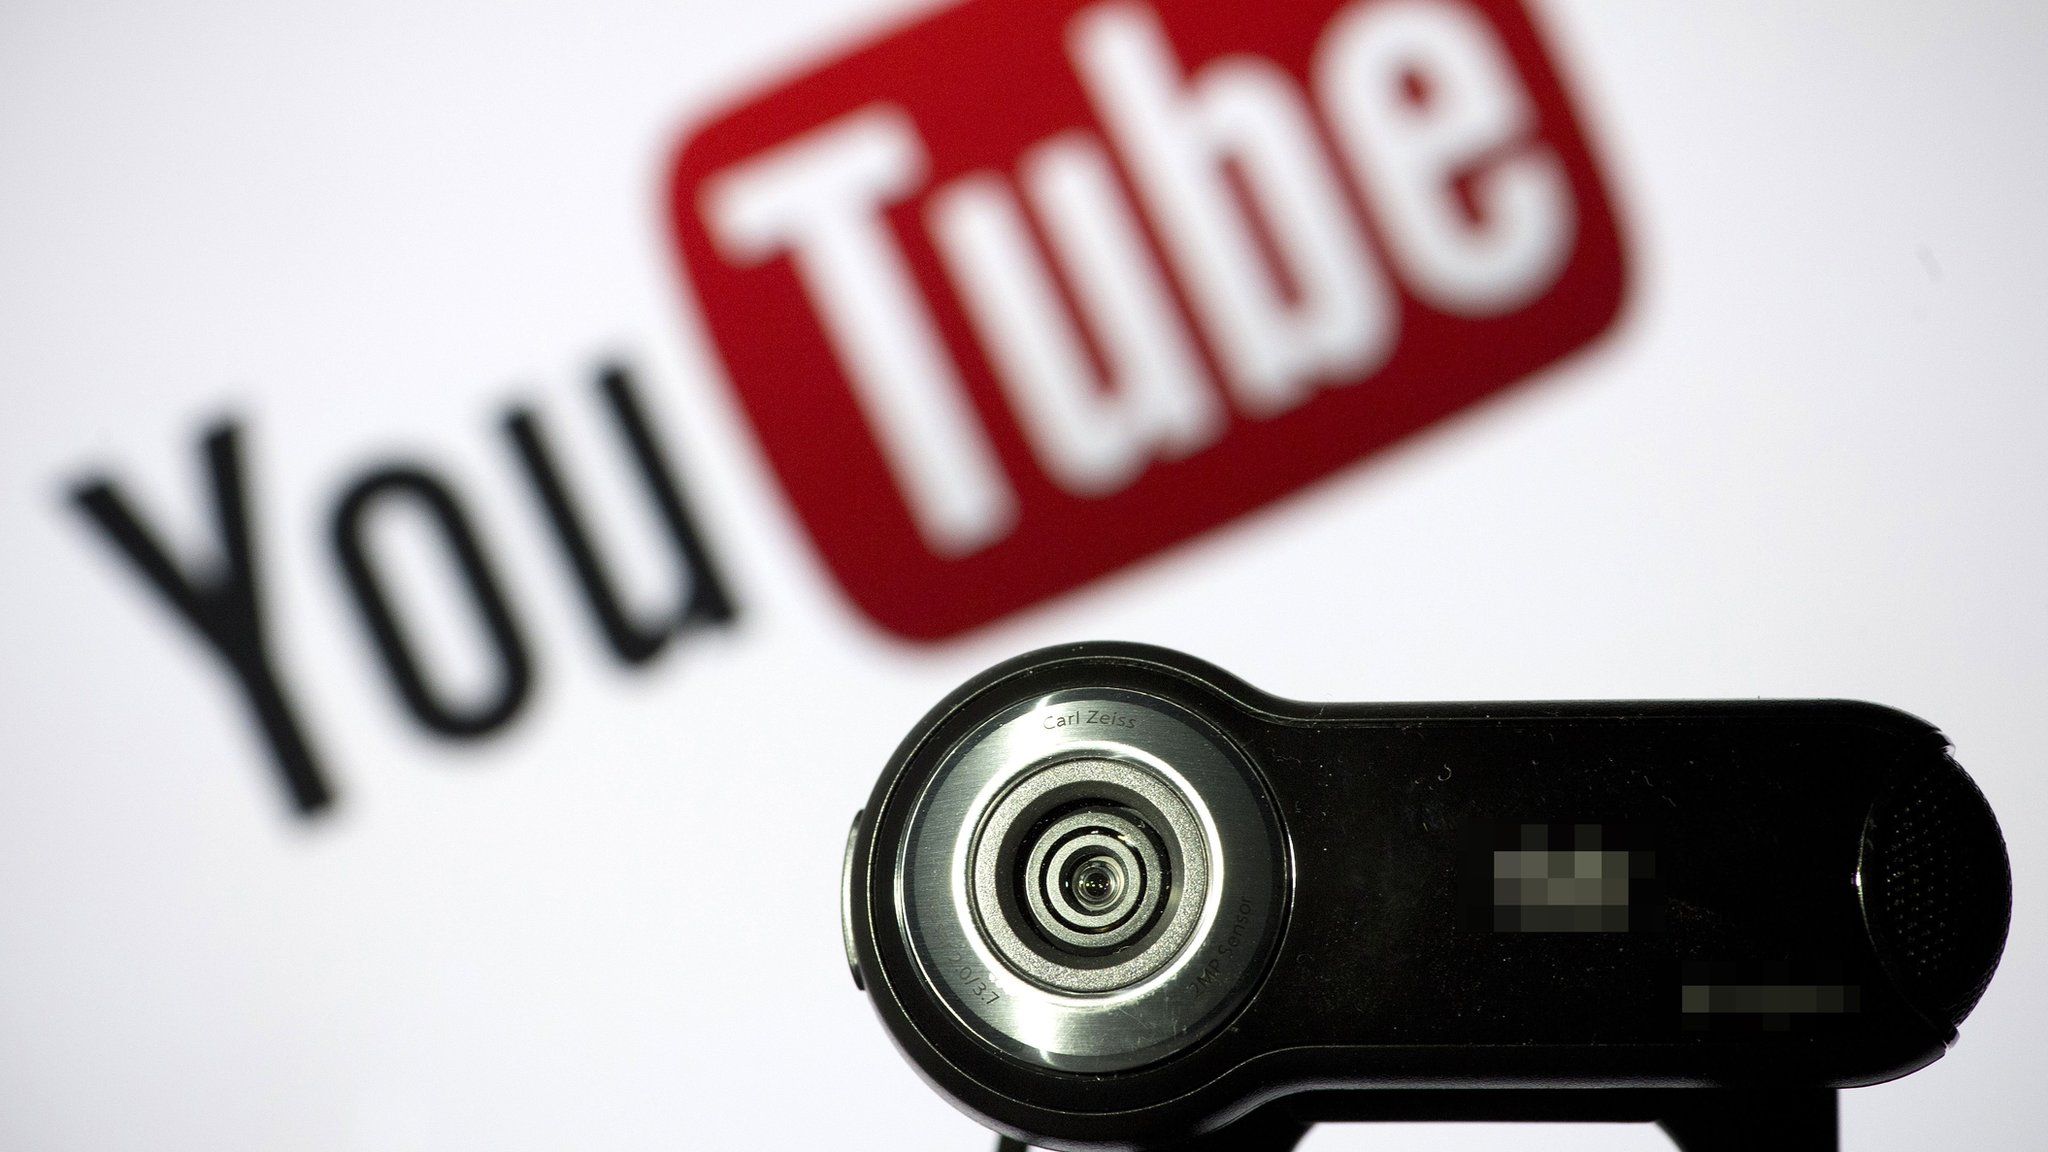 A webcam is positioned in front of a YouTube logo